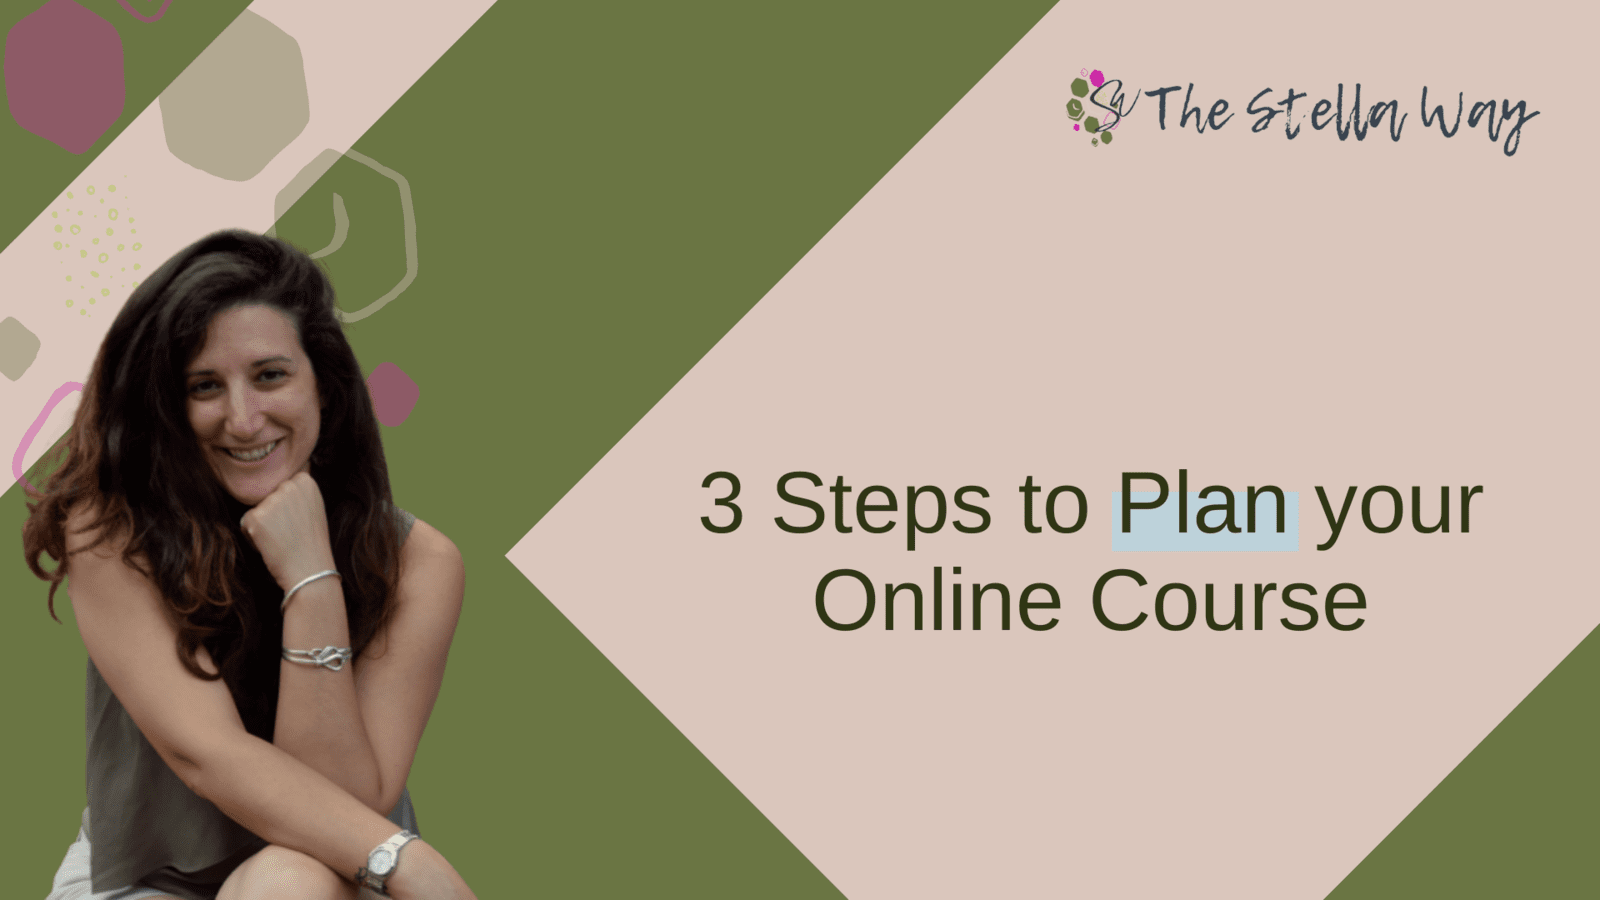 3 Steps to Plan your Online Course